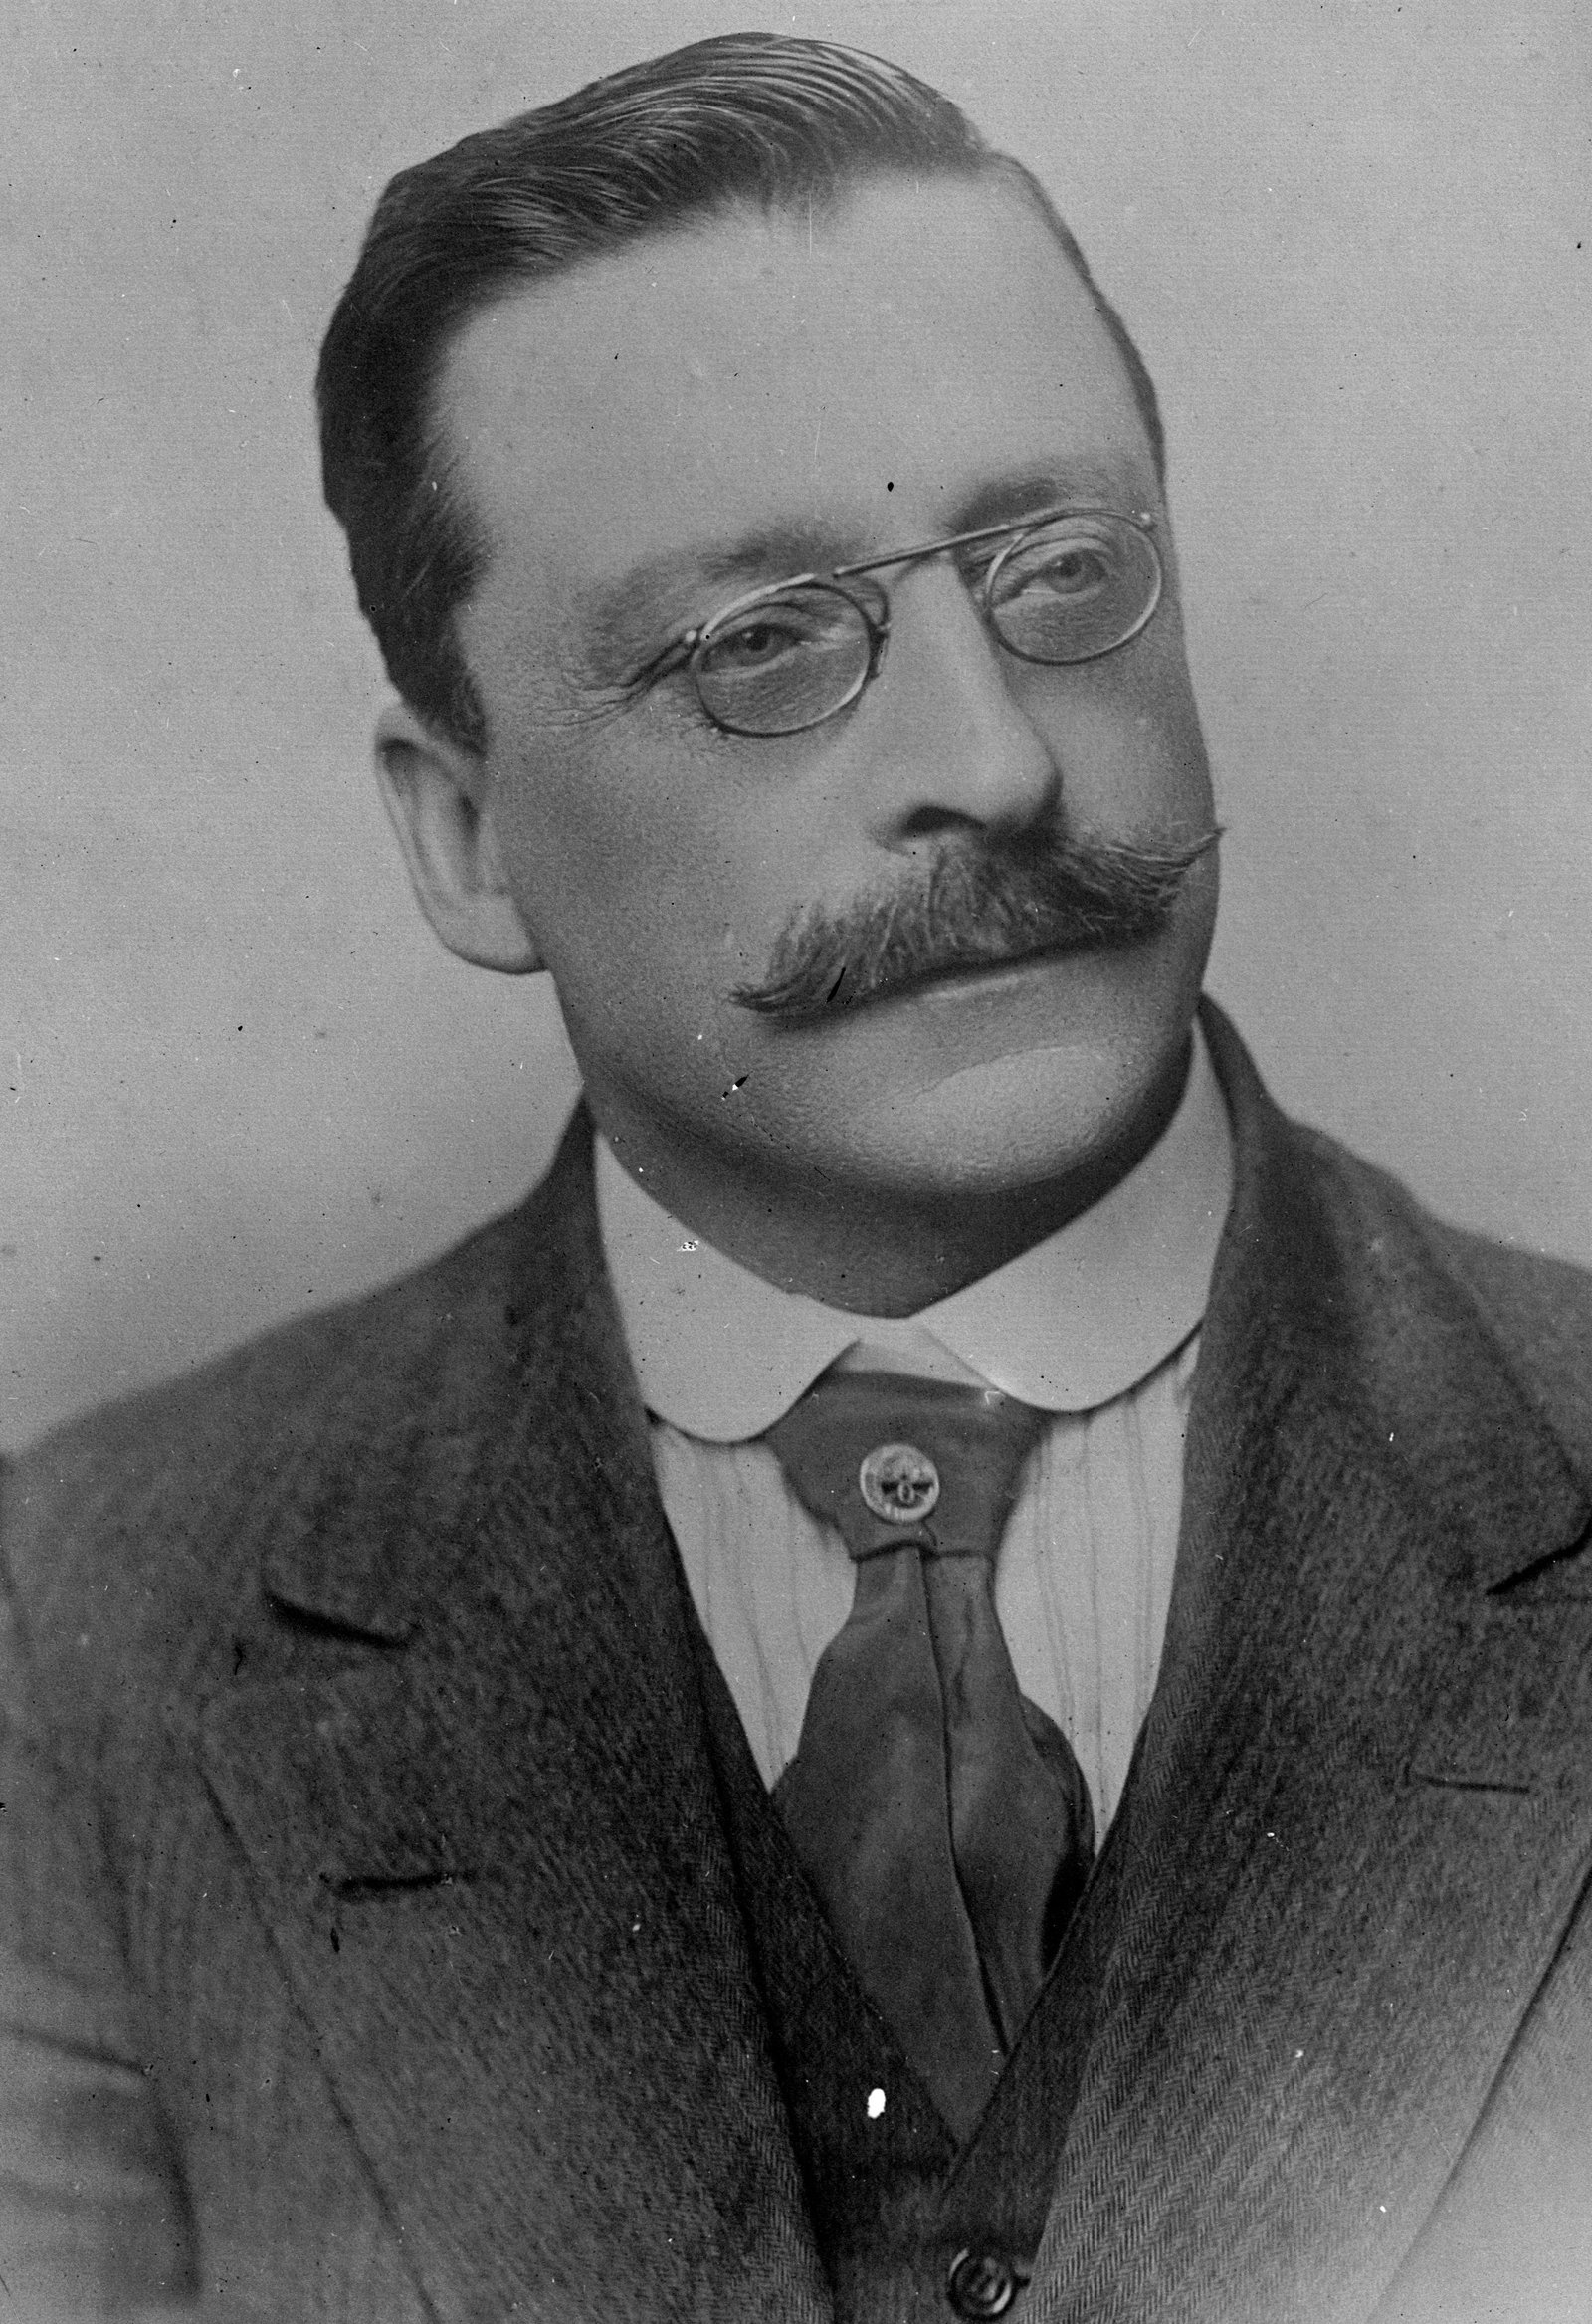 Image - President Arthur Griffith (Credit: Getty Images)